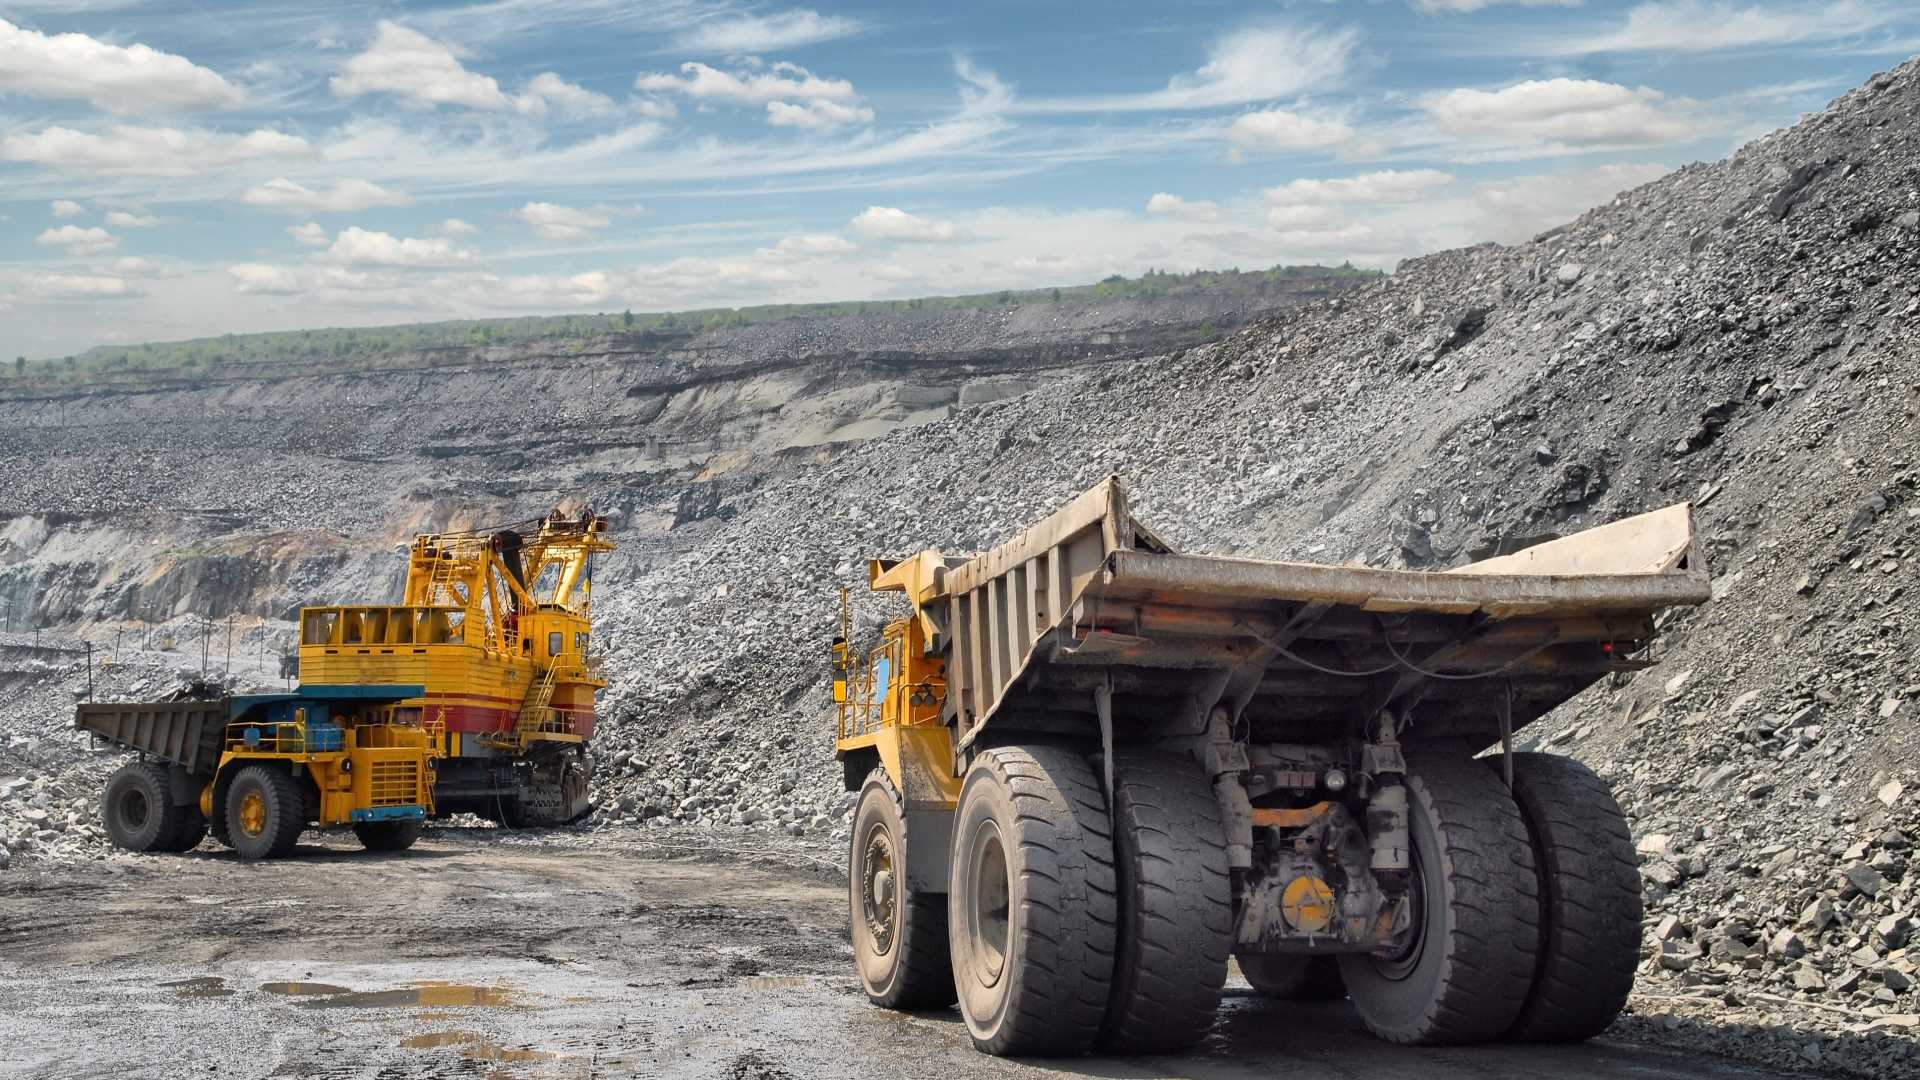 Reduce fuel costs by delivering clean fuel to mining vehicles